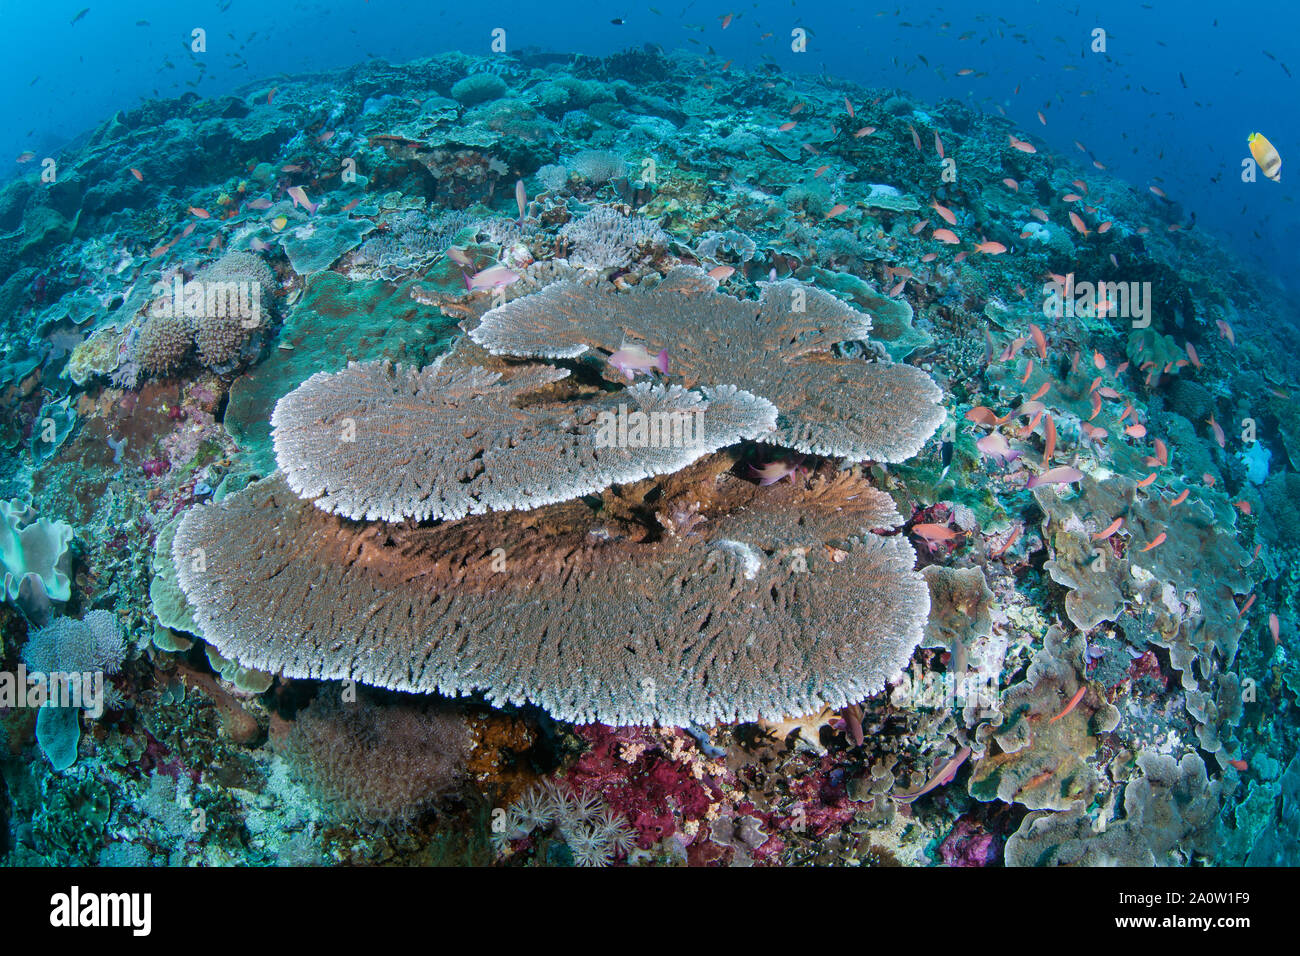 Multi-level staghorn coral table sits at the top of a pinnable surrounded by plating corals and colorful reef fish. Nusa Lembongan, Bali, Indonesia Stock Photo